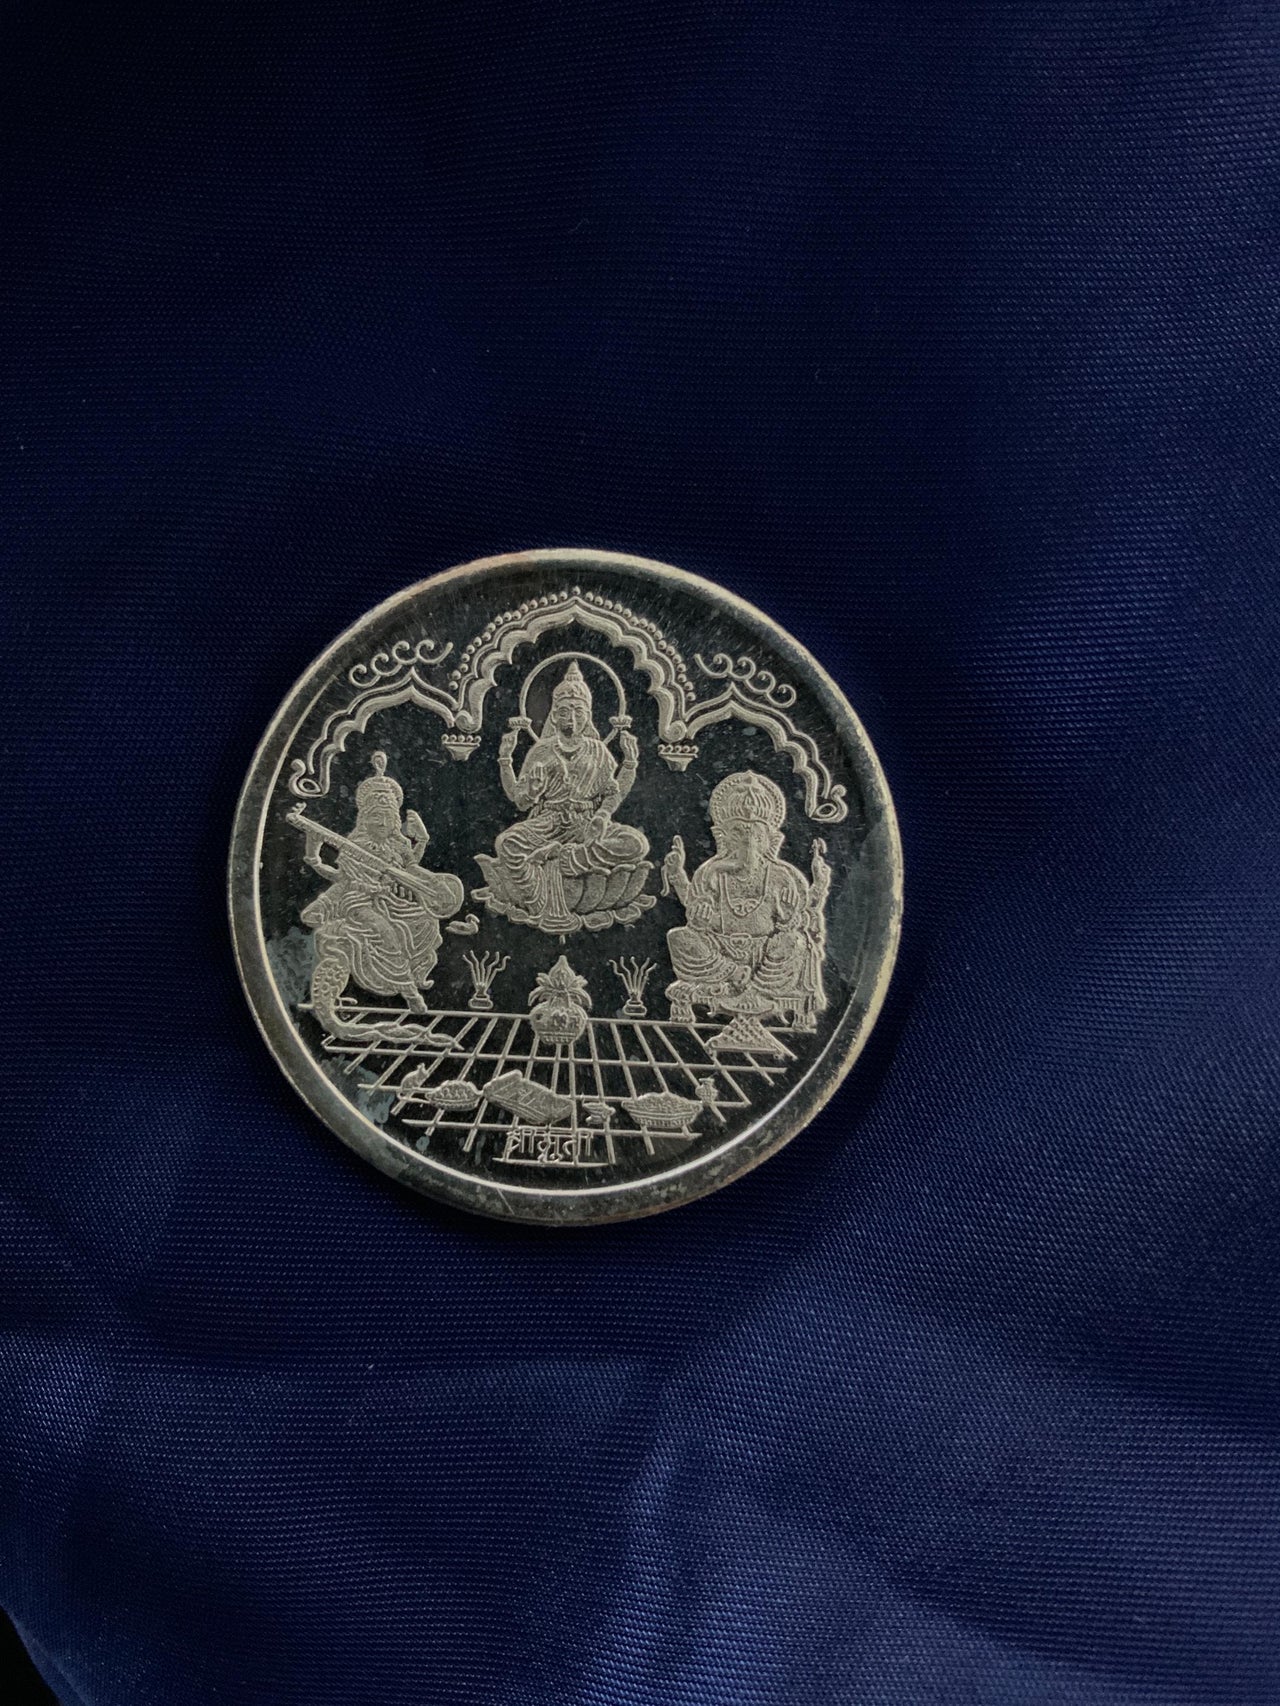 Purest Silver Coins